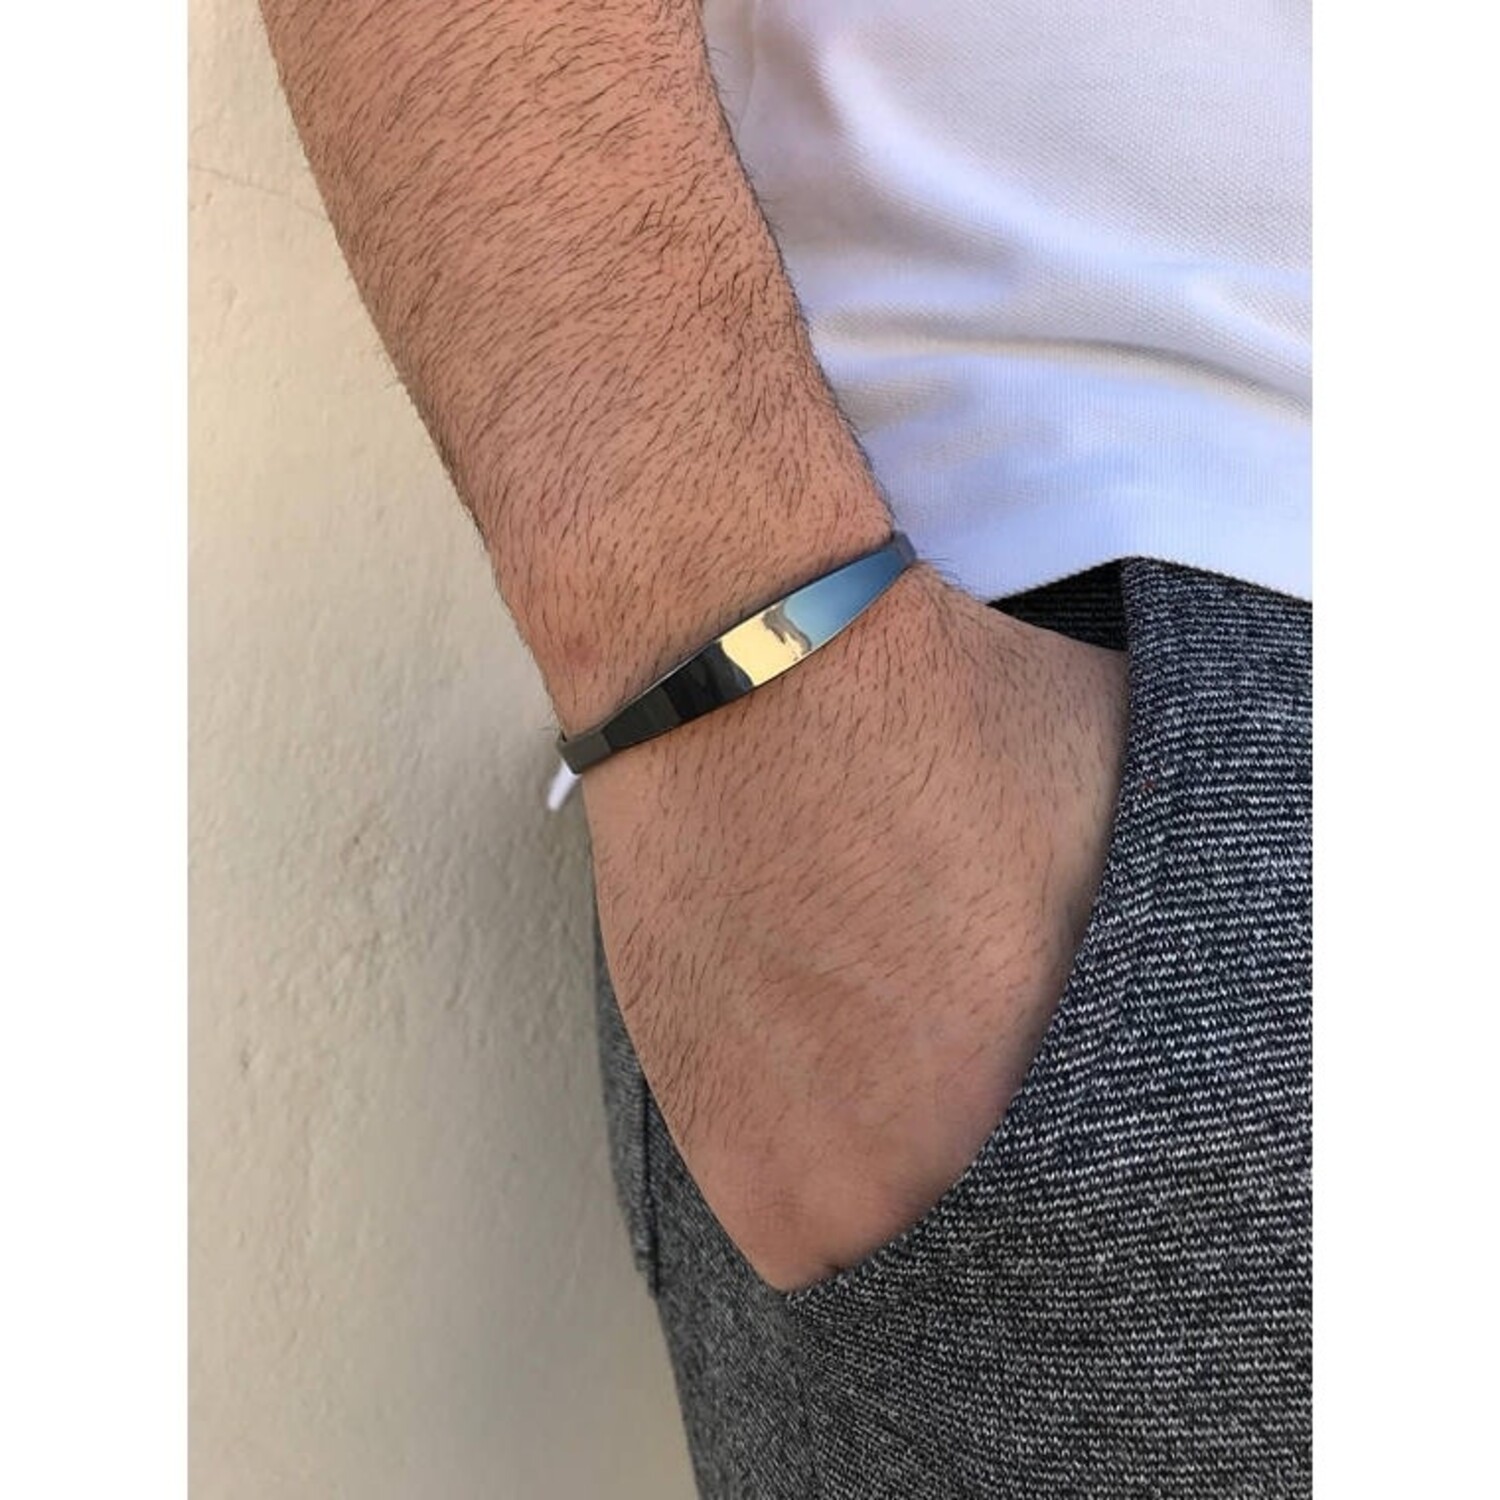 The Beadsmith Bracelet Cuff – Made of Raw Brass – Adjustable, Open Bangle  for Men and Women - Flat Style, 2.7-Inch Wide – Minimalist Design Jewelry –  Can Be DIY Custom Designed - Walmart.com